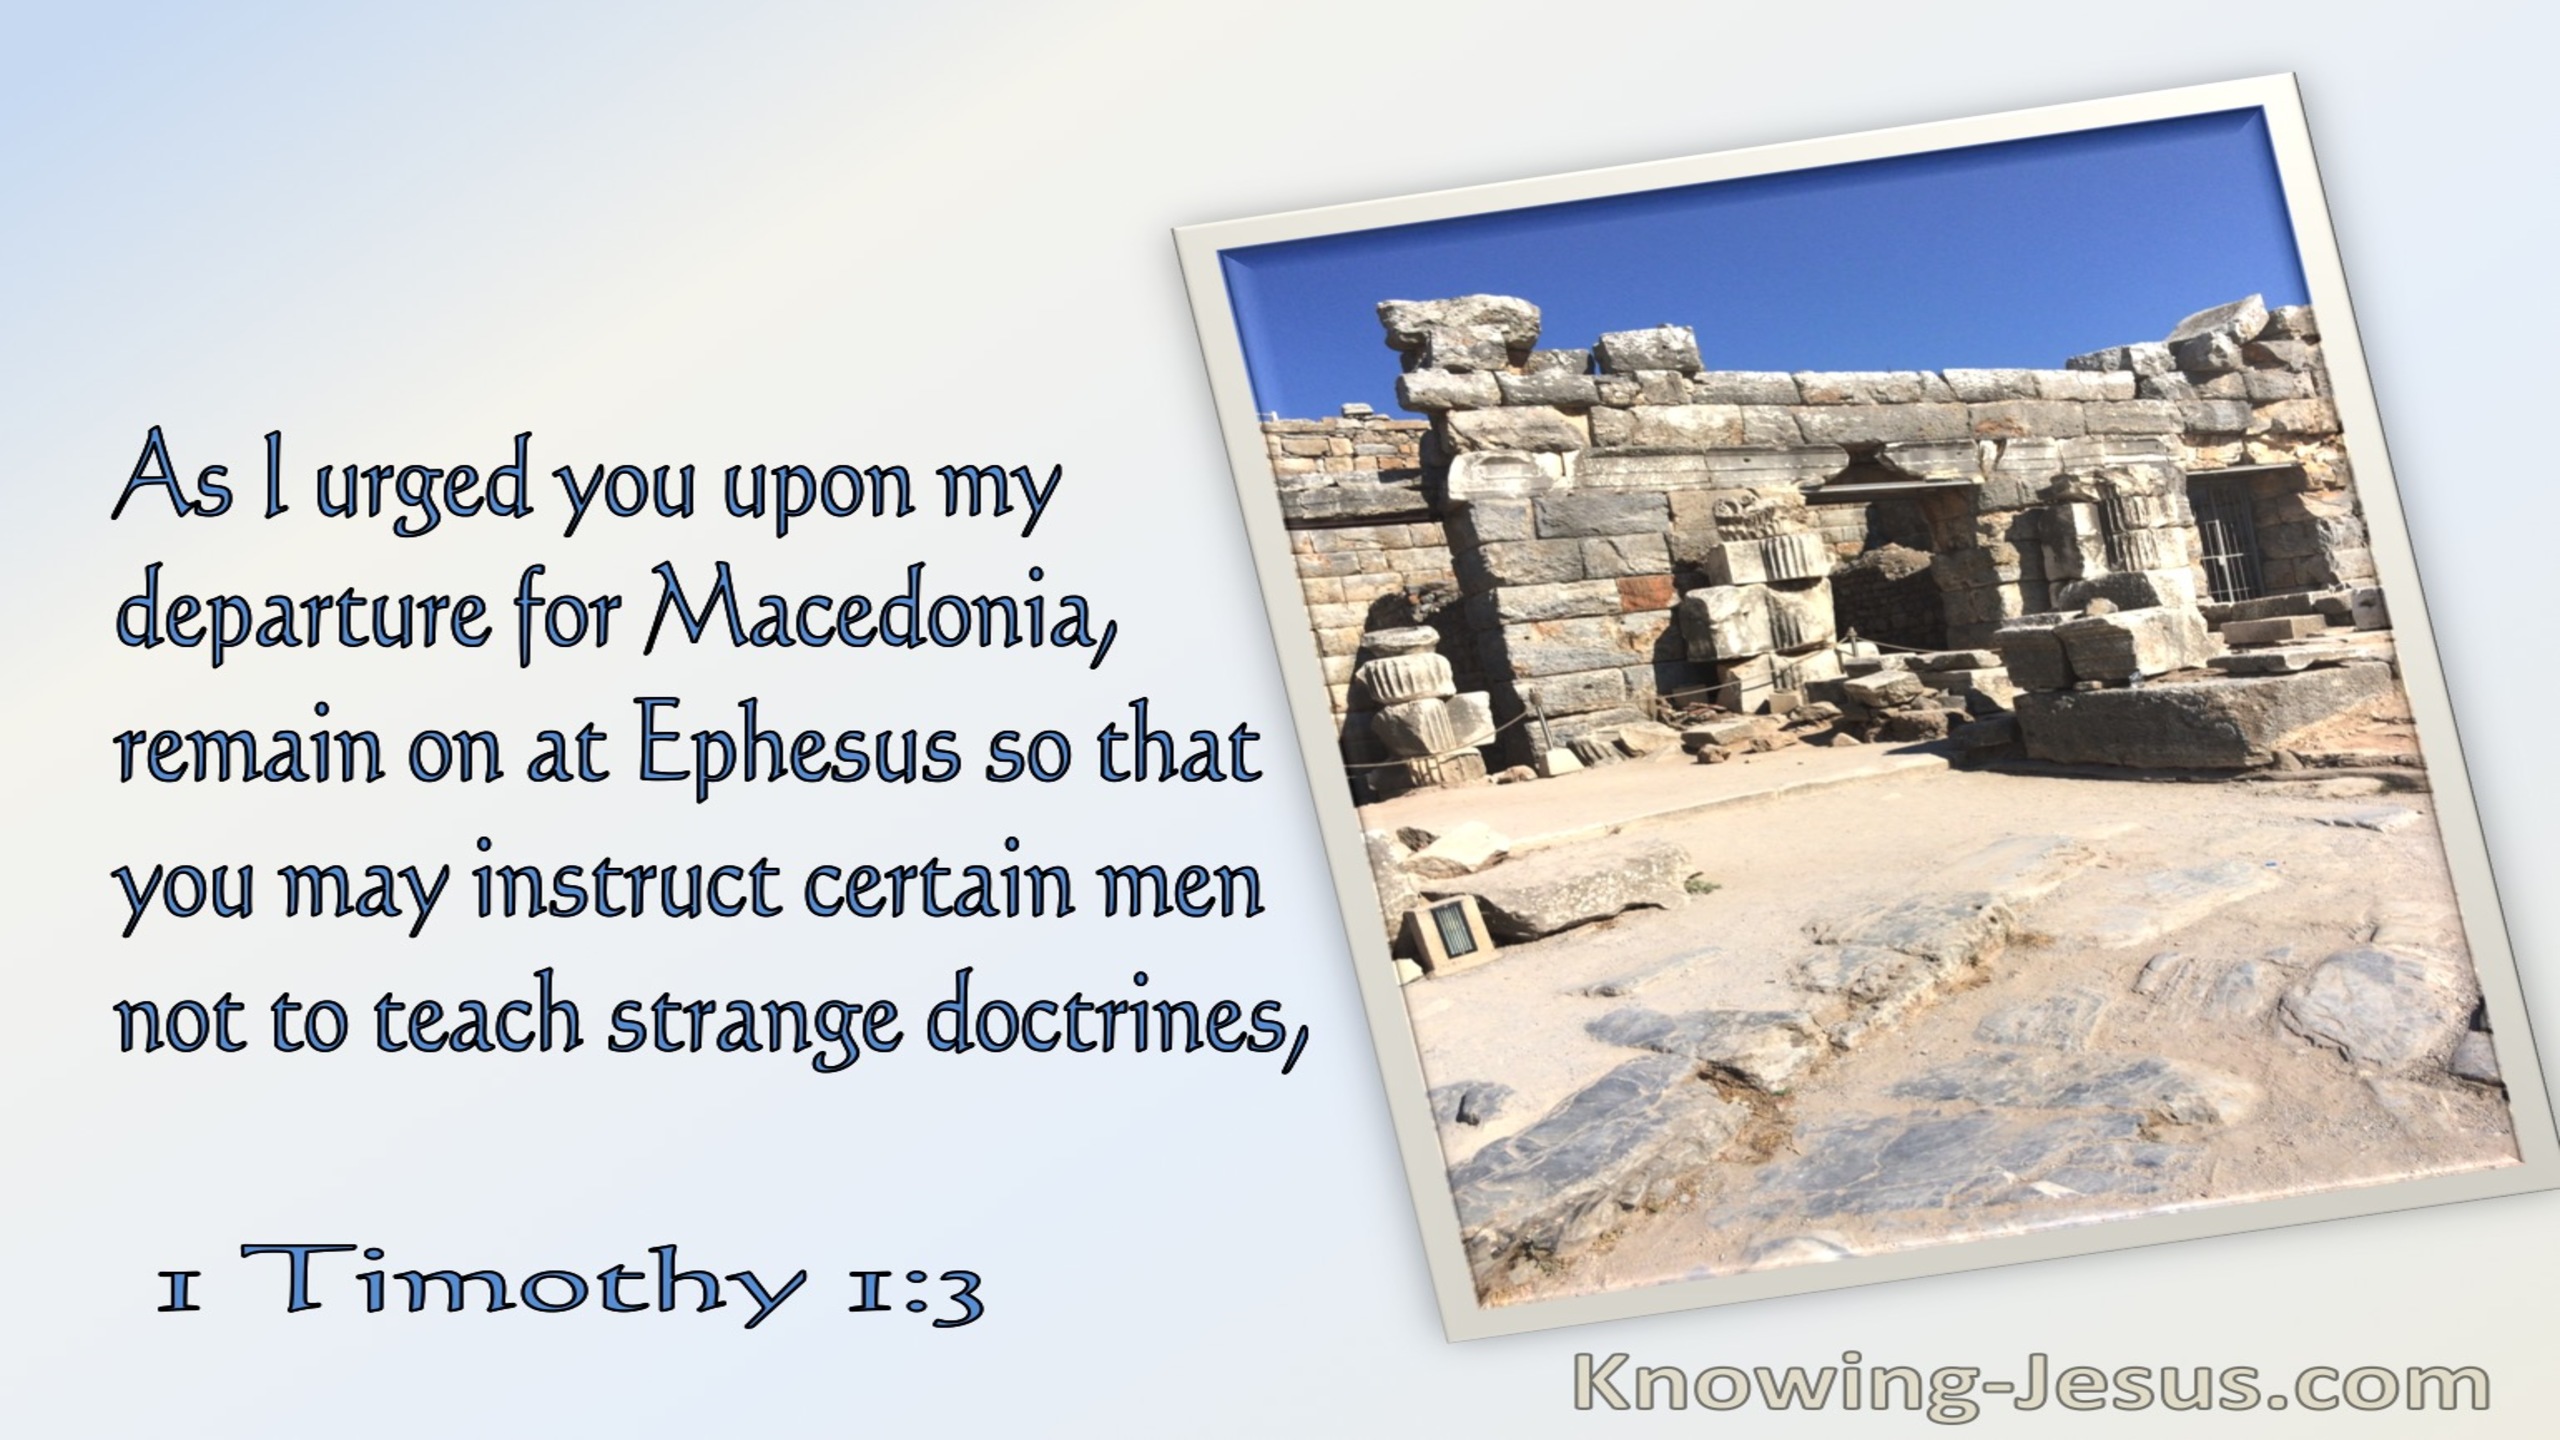 1 Timothy 1:3 Remain At Ephesus So You May Instruct Certain Men (blue)